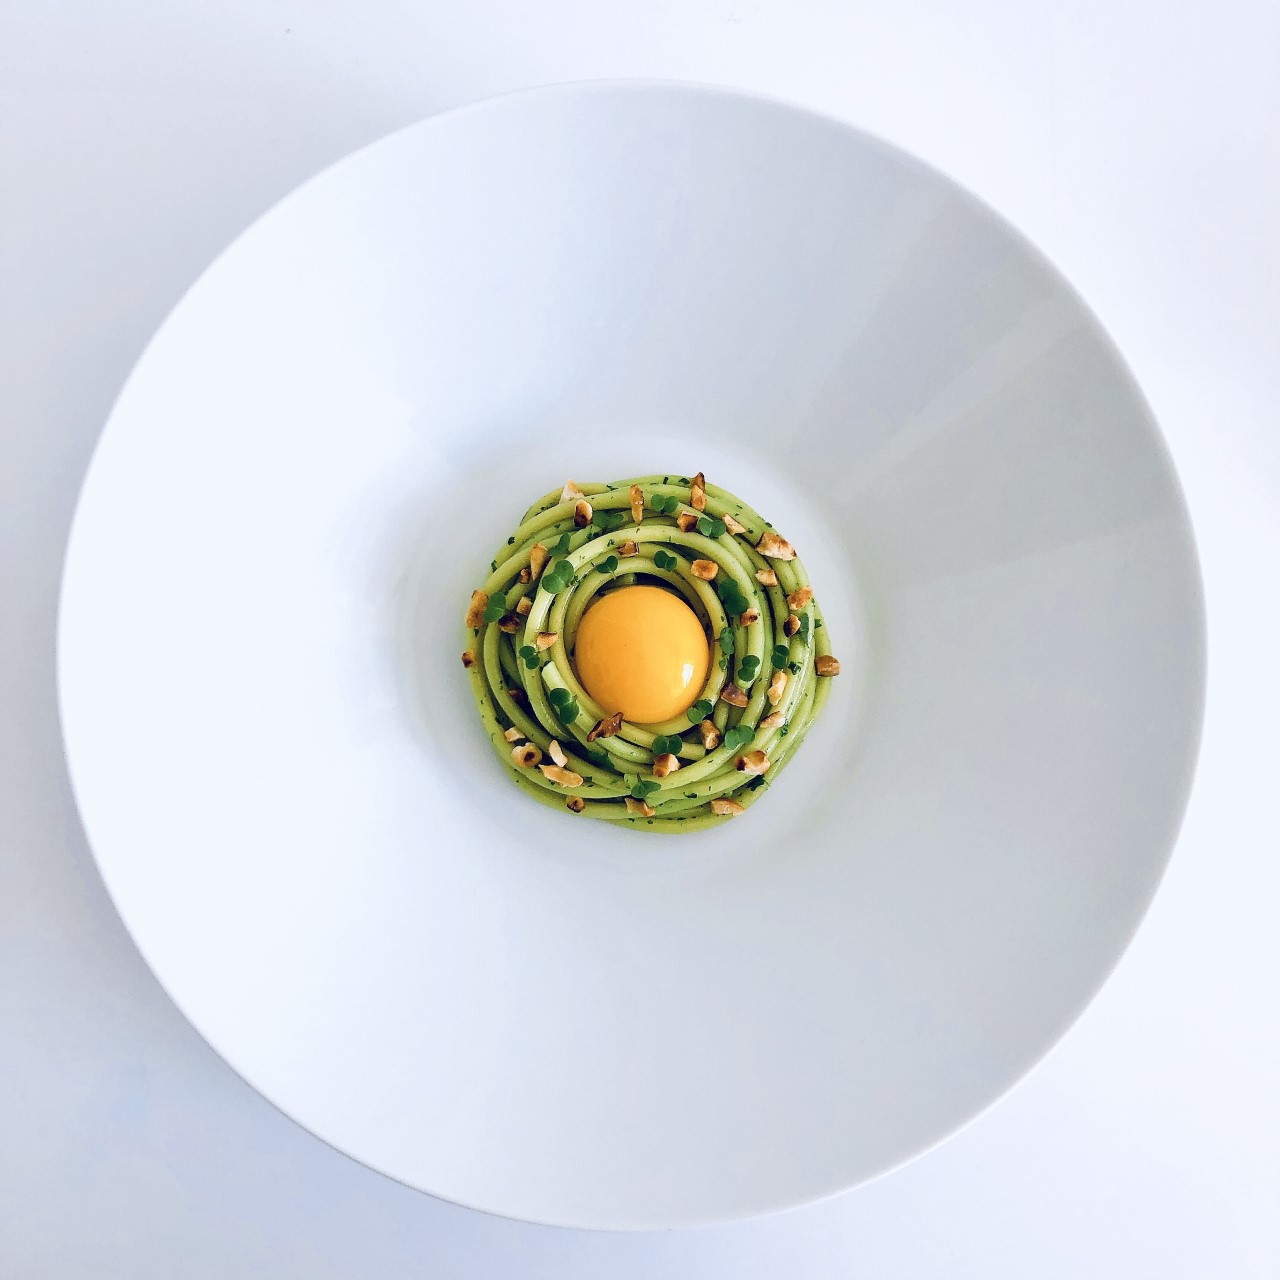 Bucatini with deconstructed pesto, mint & confit egg yolk